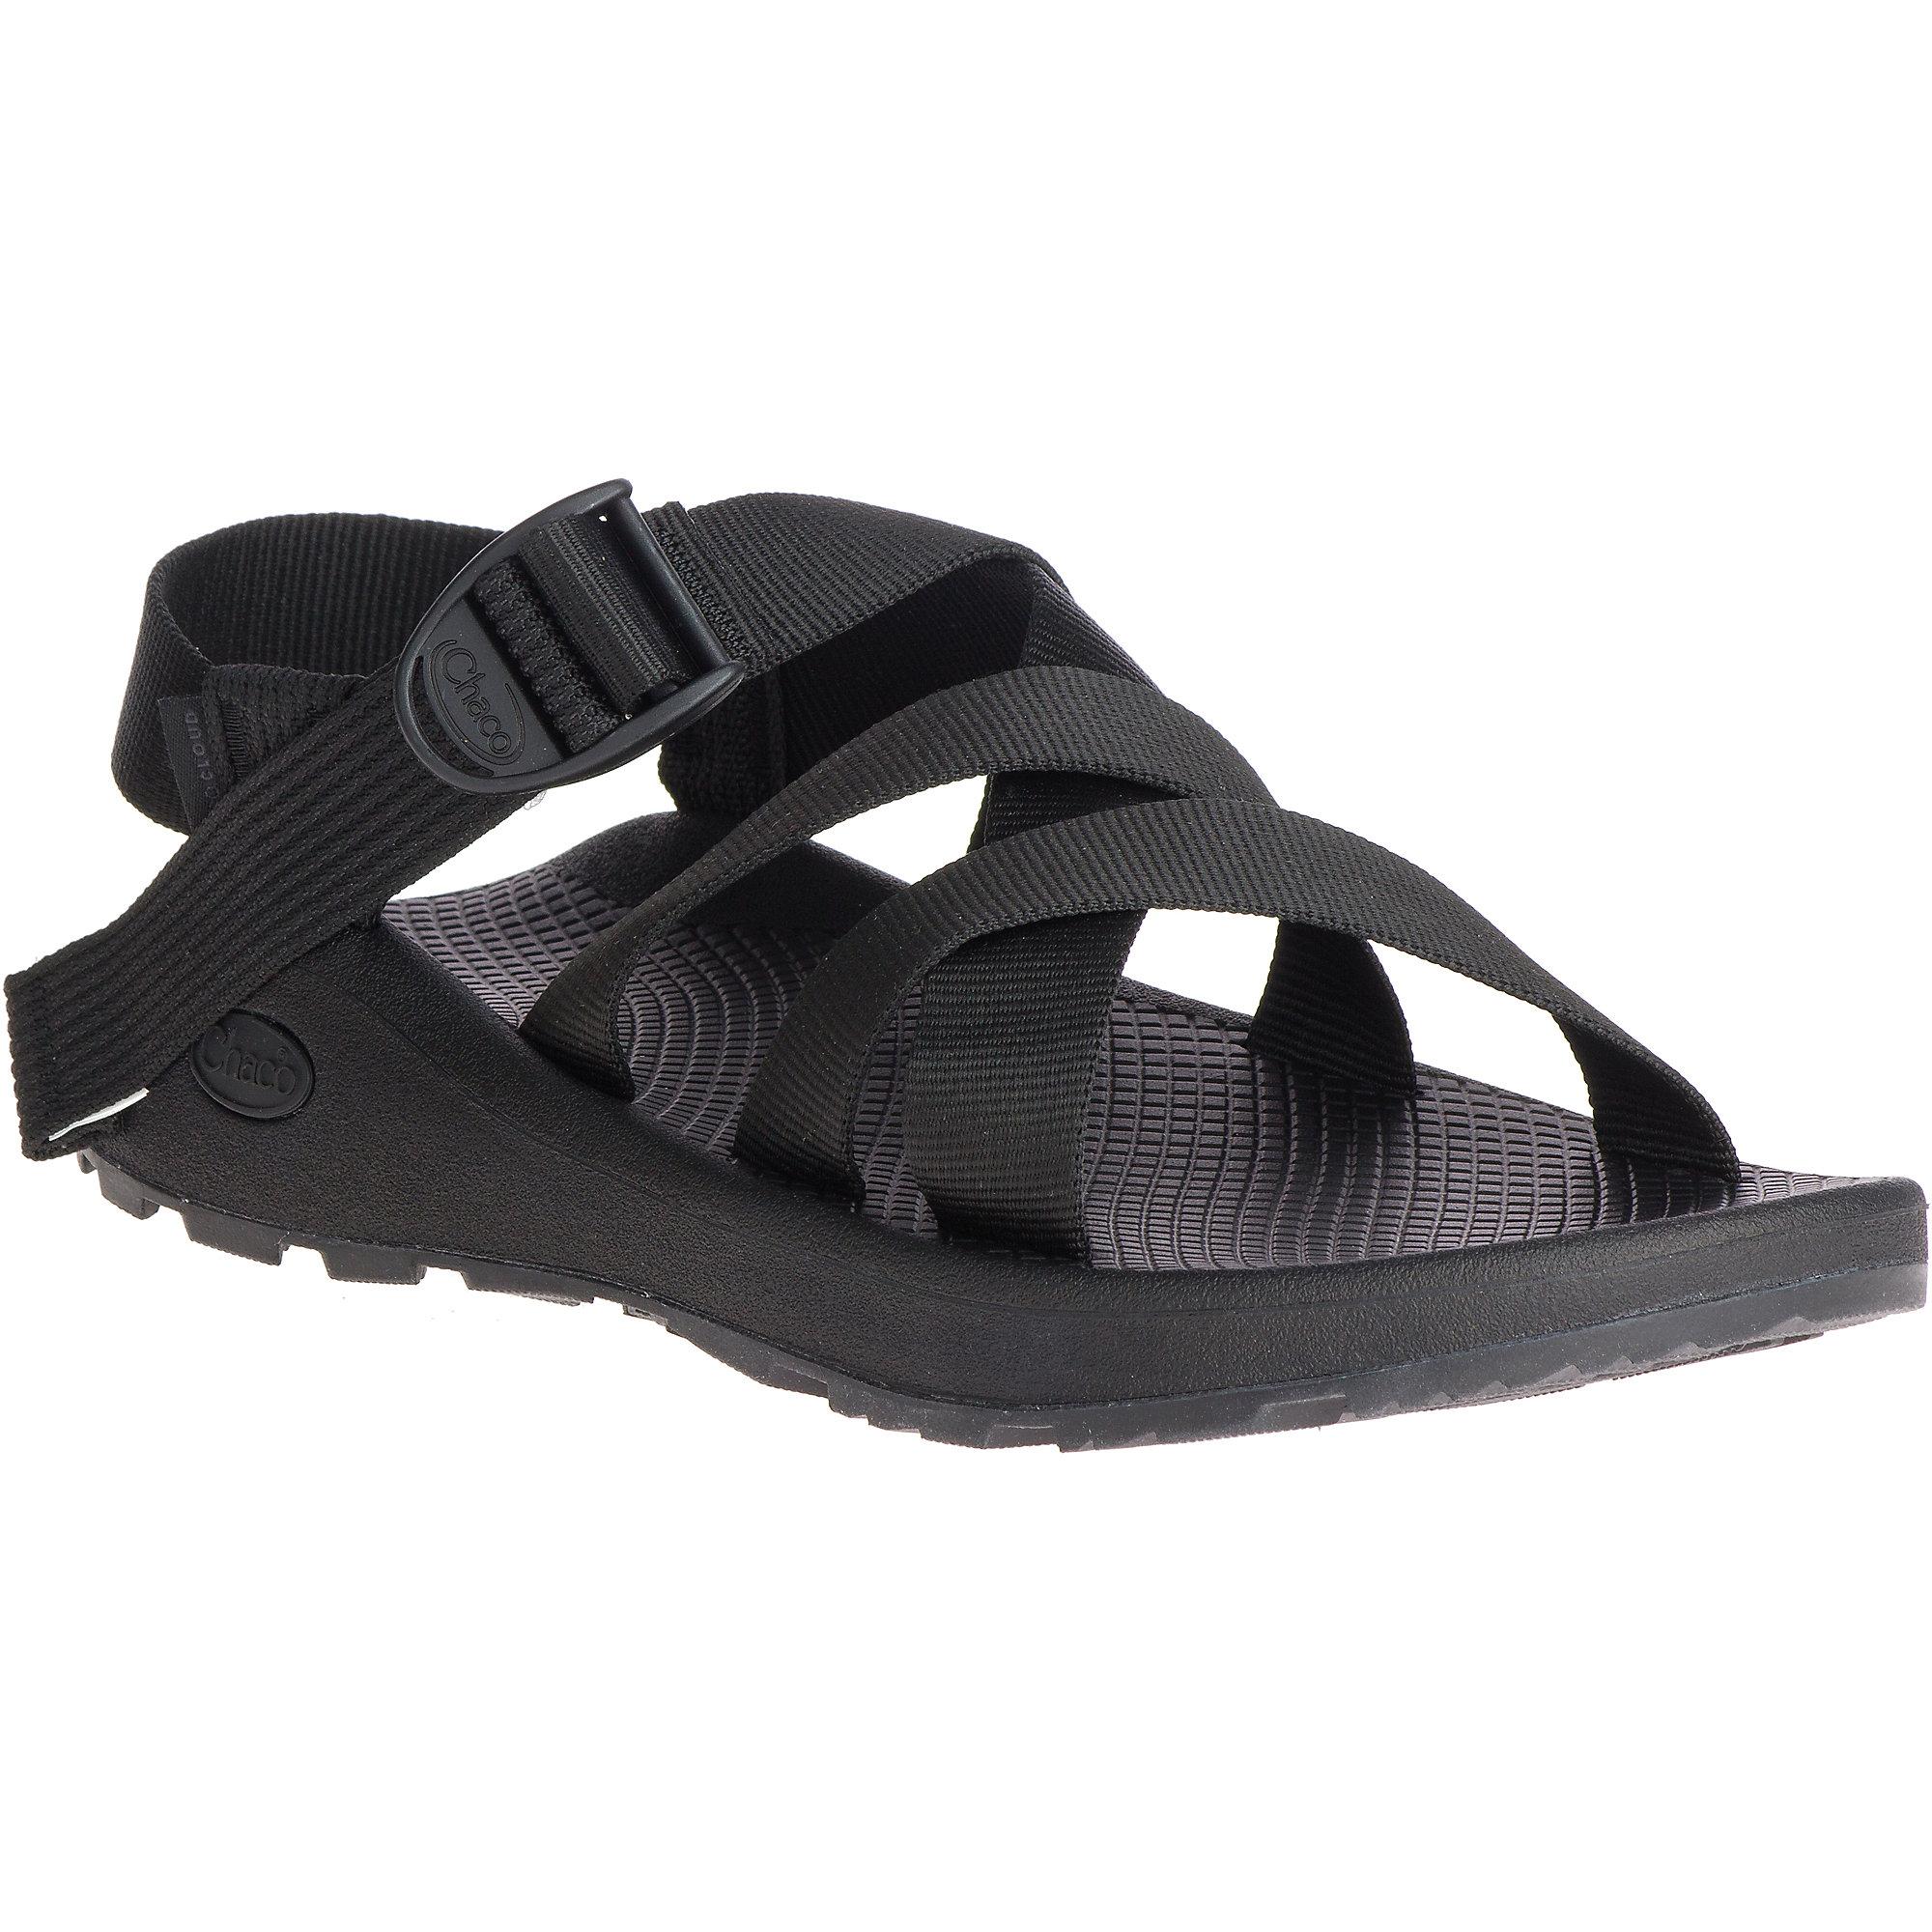 Chaco Rubber Banded Z/cloud Sandal in Black for Men - Lyst